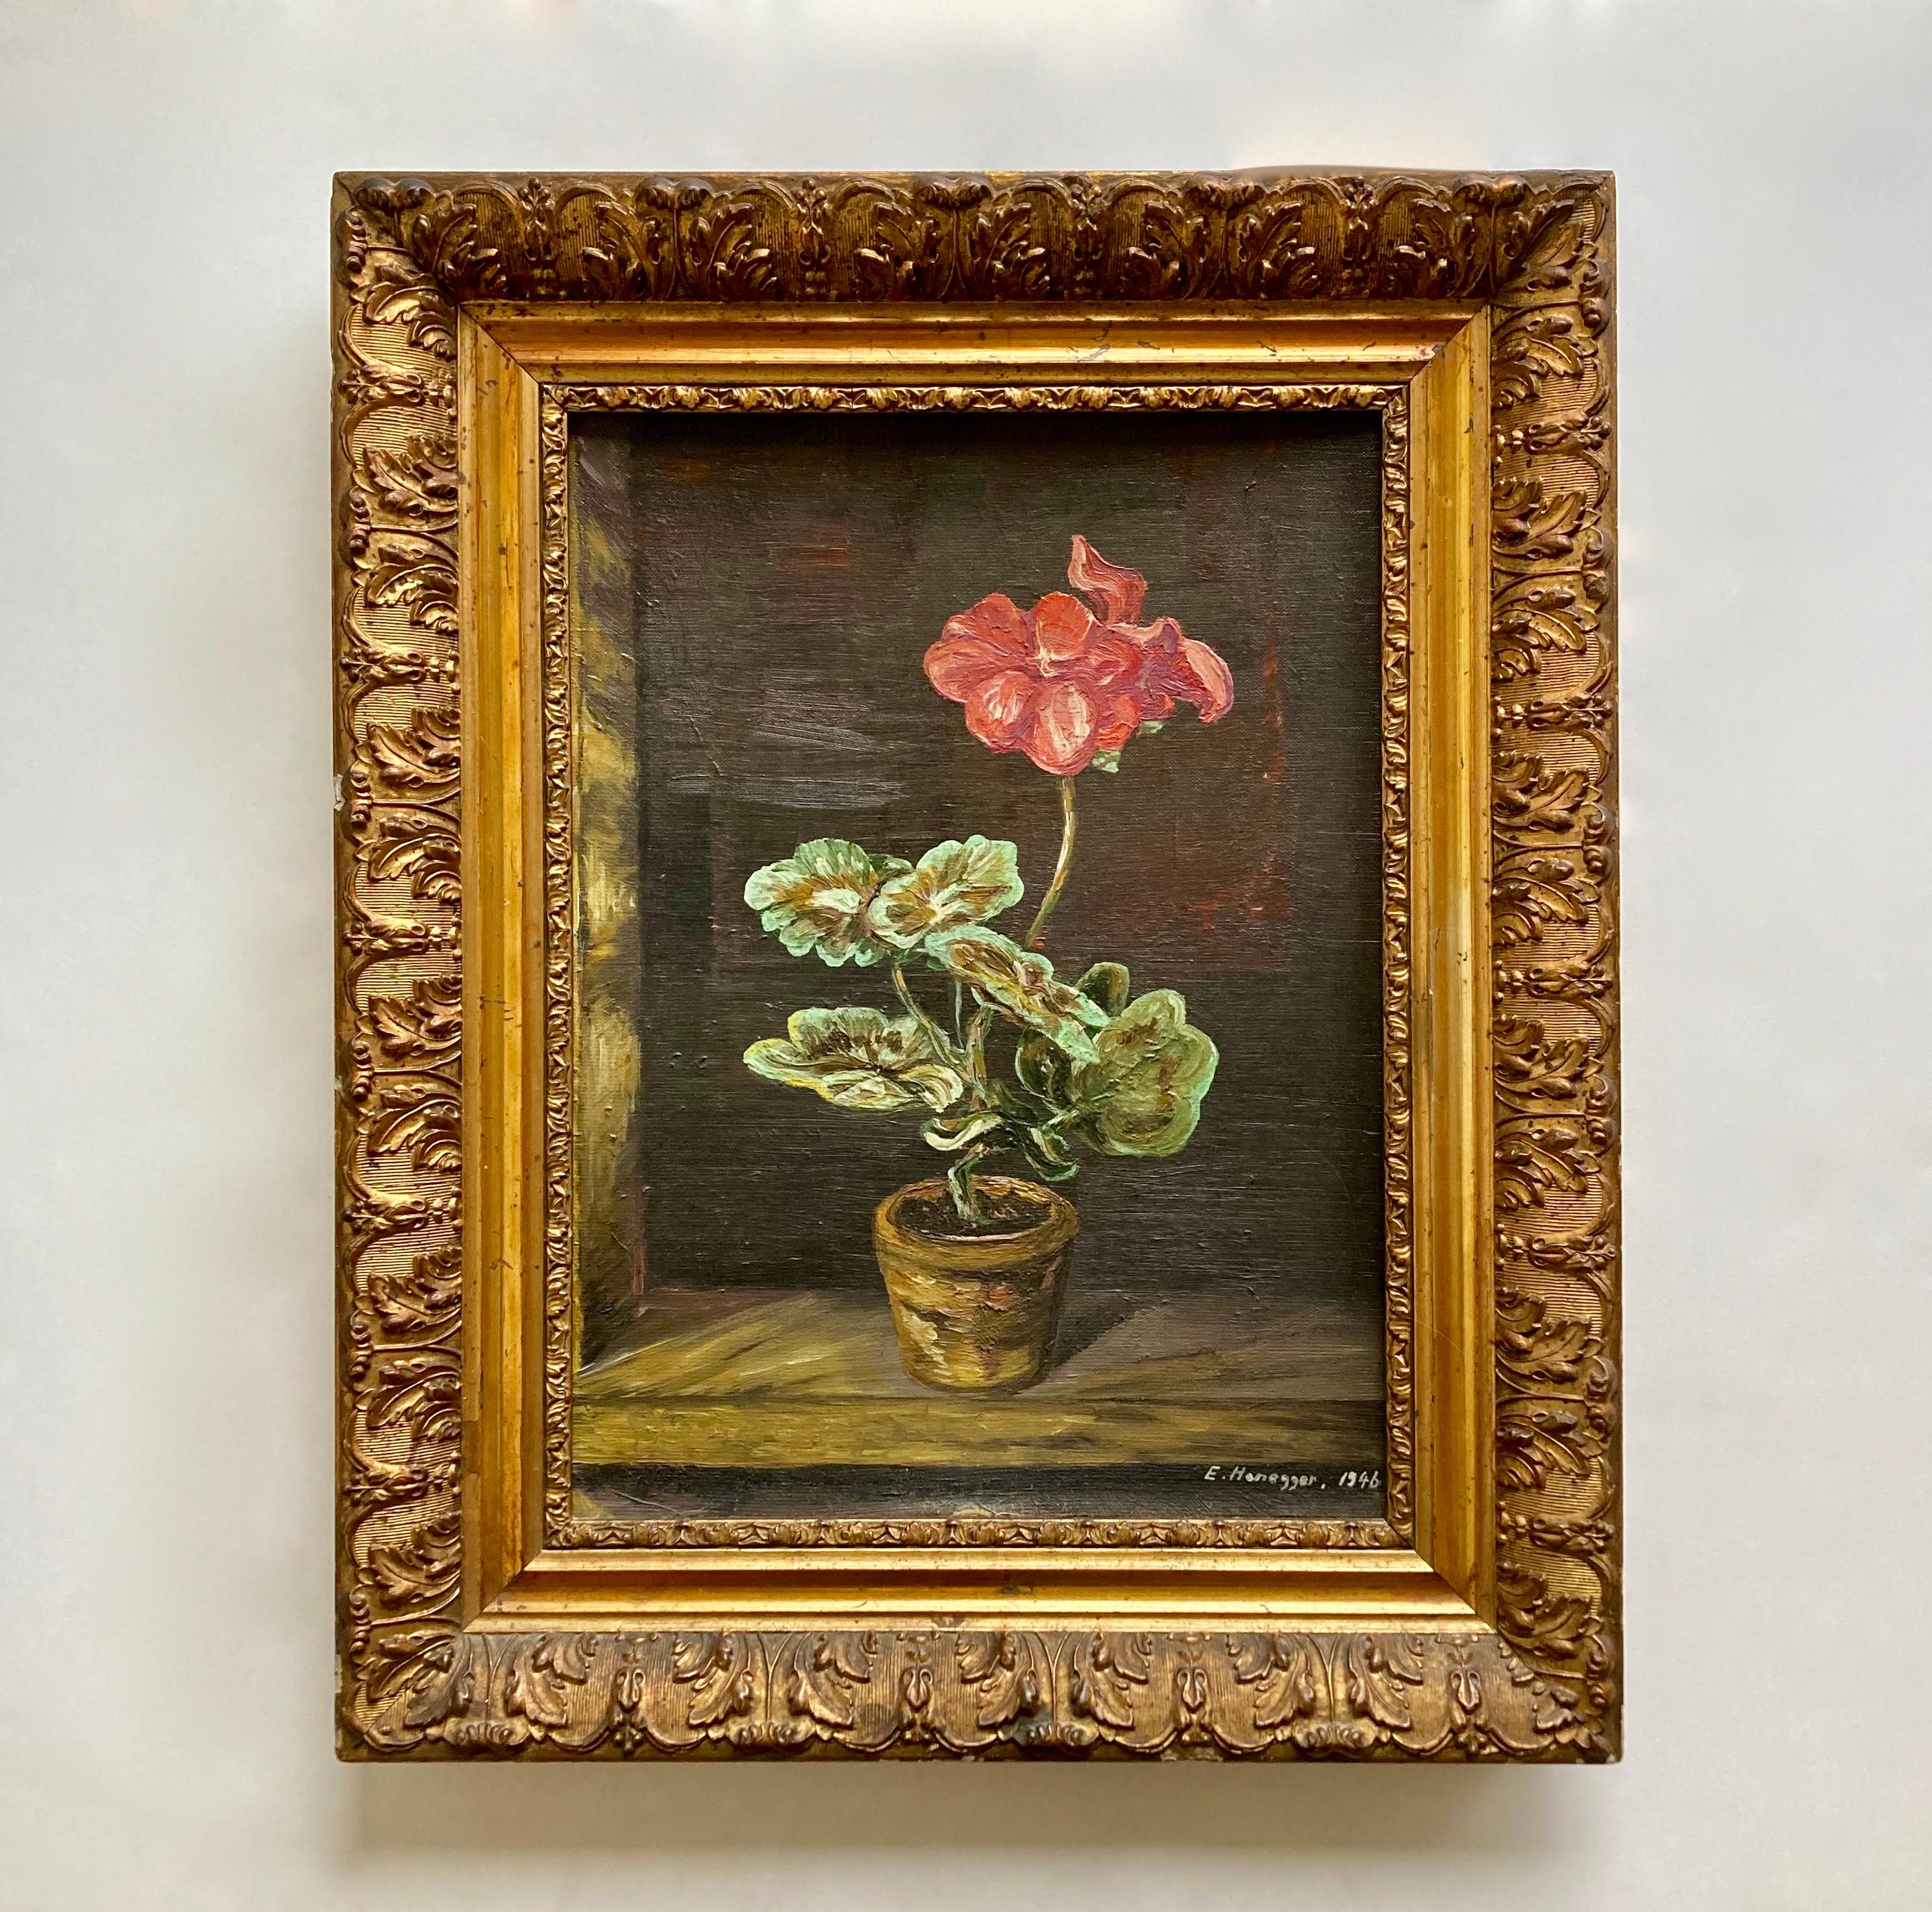 A simple but beautiful, vintage still-life of a potted pink bégonia. The painting has been sourced in eastern France and is most likely French or Swiss by origine. According to the label on the back of the painting, the cardboard panel comes from a